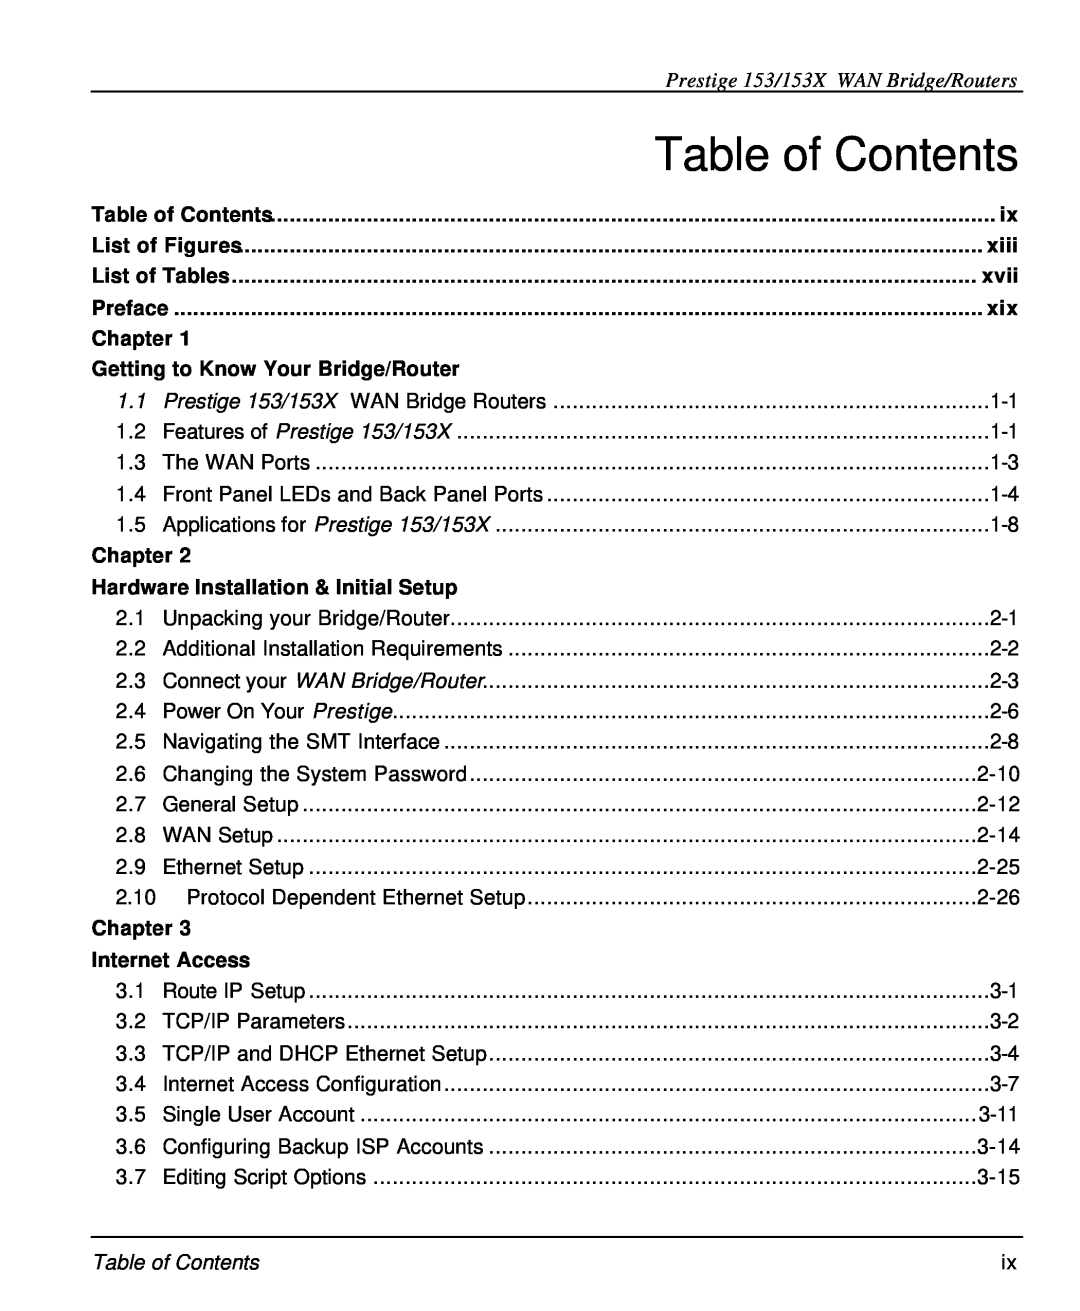 ZyXEL Communications Table of Contents, Prestige 153/153X WAN Bridge/Routers, xiii, xvii, Chapter, Internet Access 